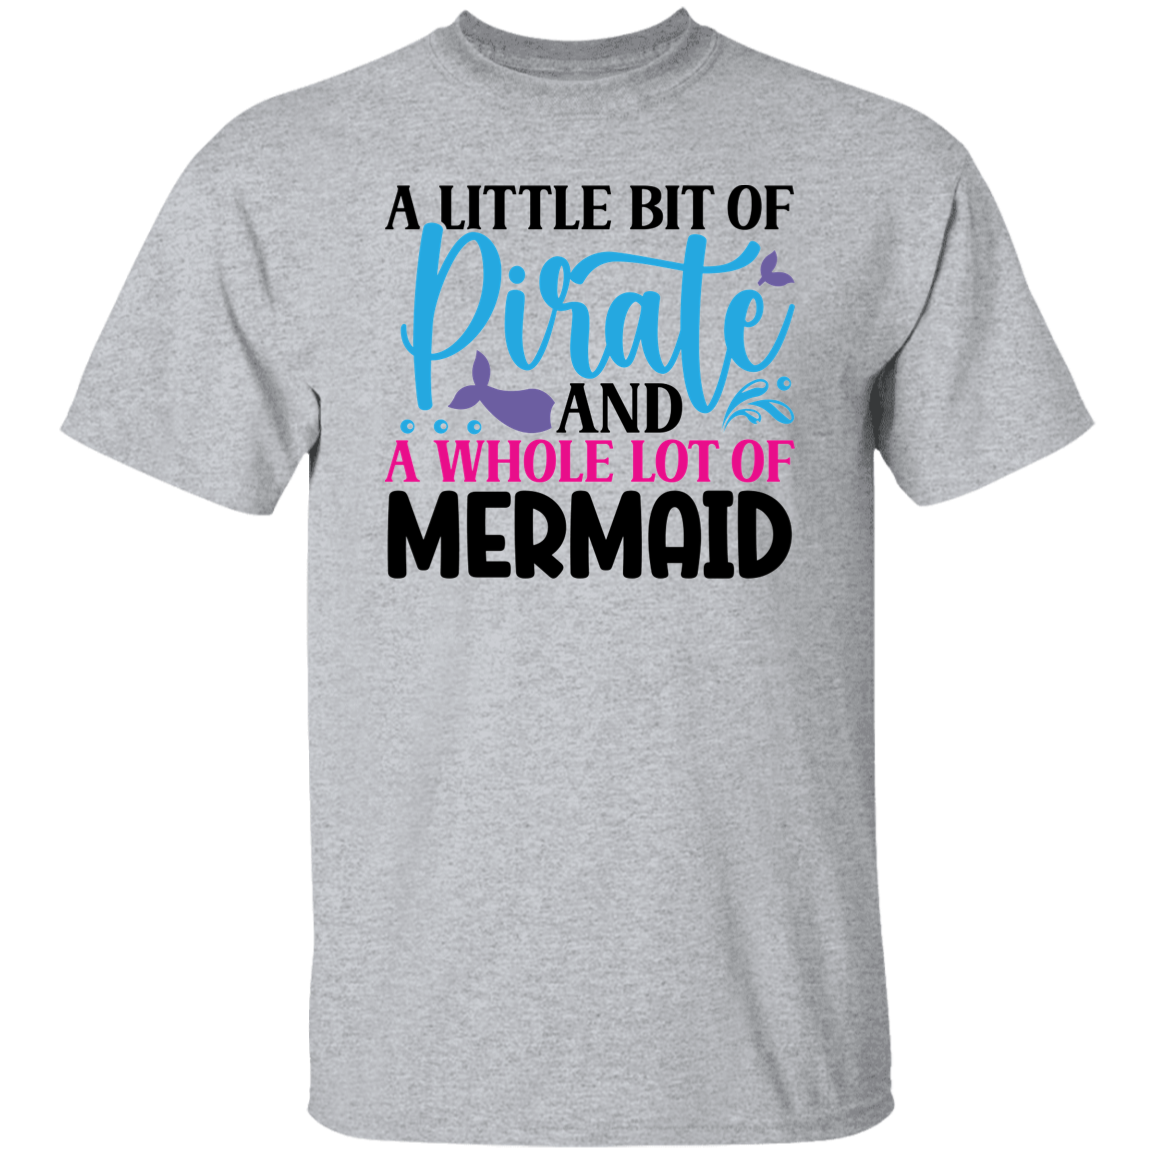 A Little Bit of Pirate and A Whole Lot of Mermaid G500 5.3 oz. T-Shirt